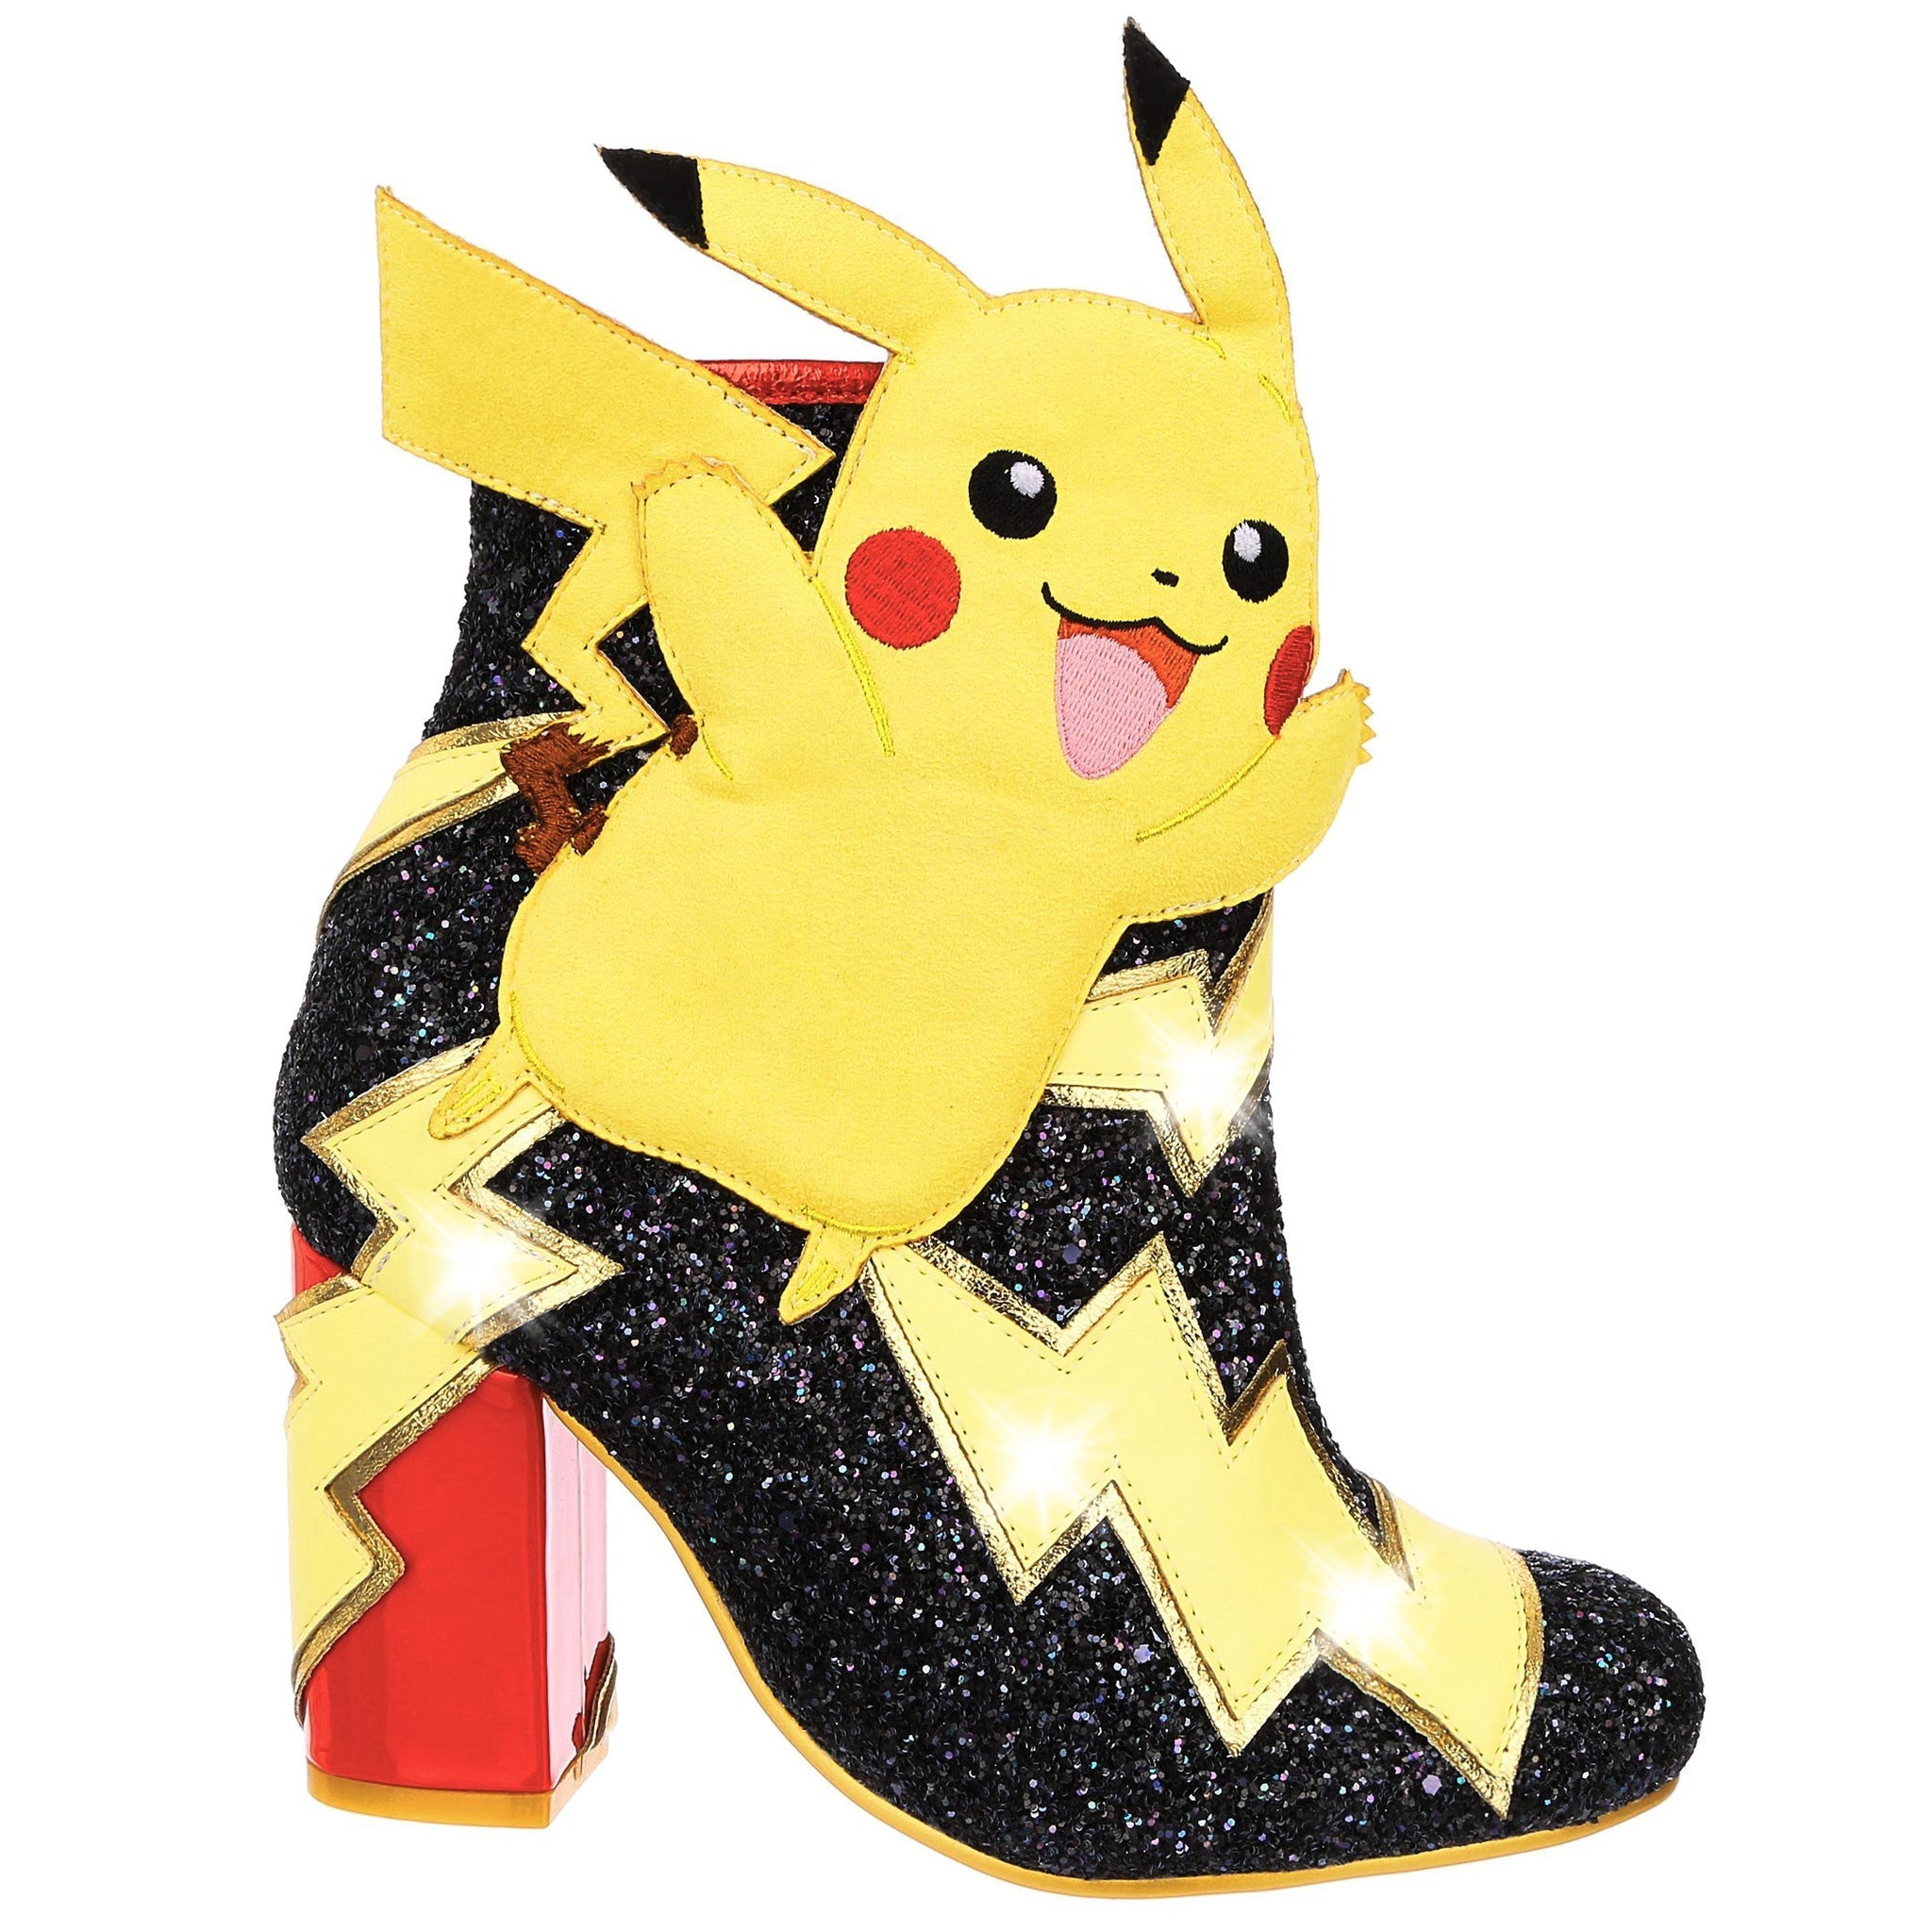 Black glitter high heel boot with applique of Pokemon character Pikachu leaping off the boot infront of gold and yellow lightening bolts with white LED lights, finished with a red heel and zip on the inside of the boot.